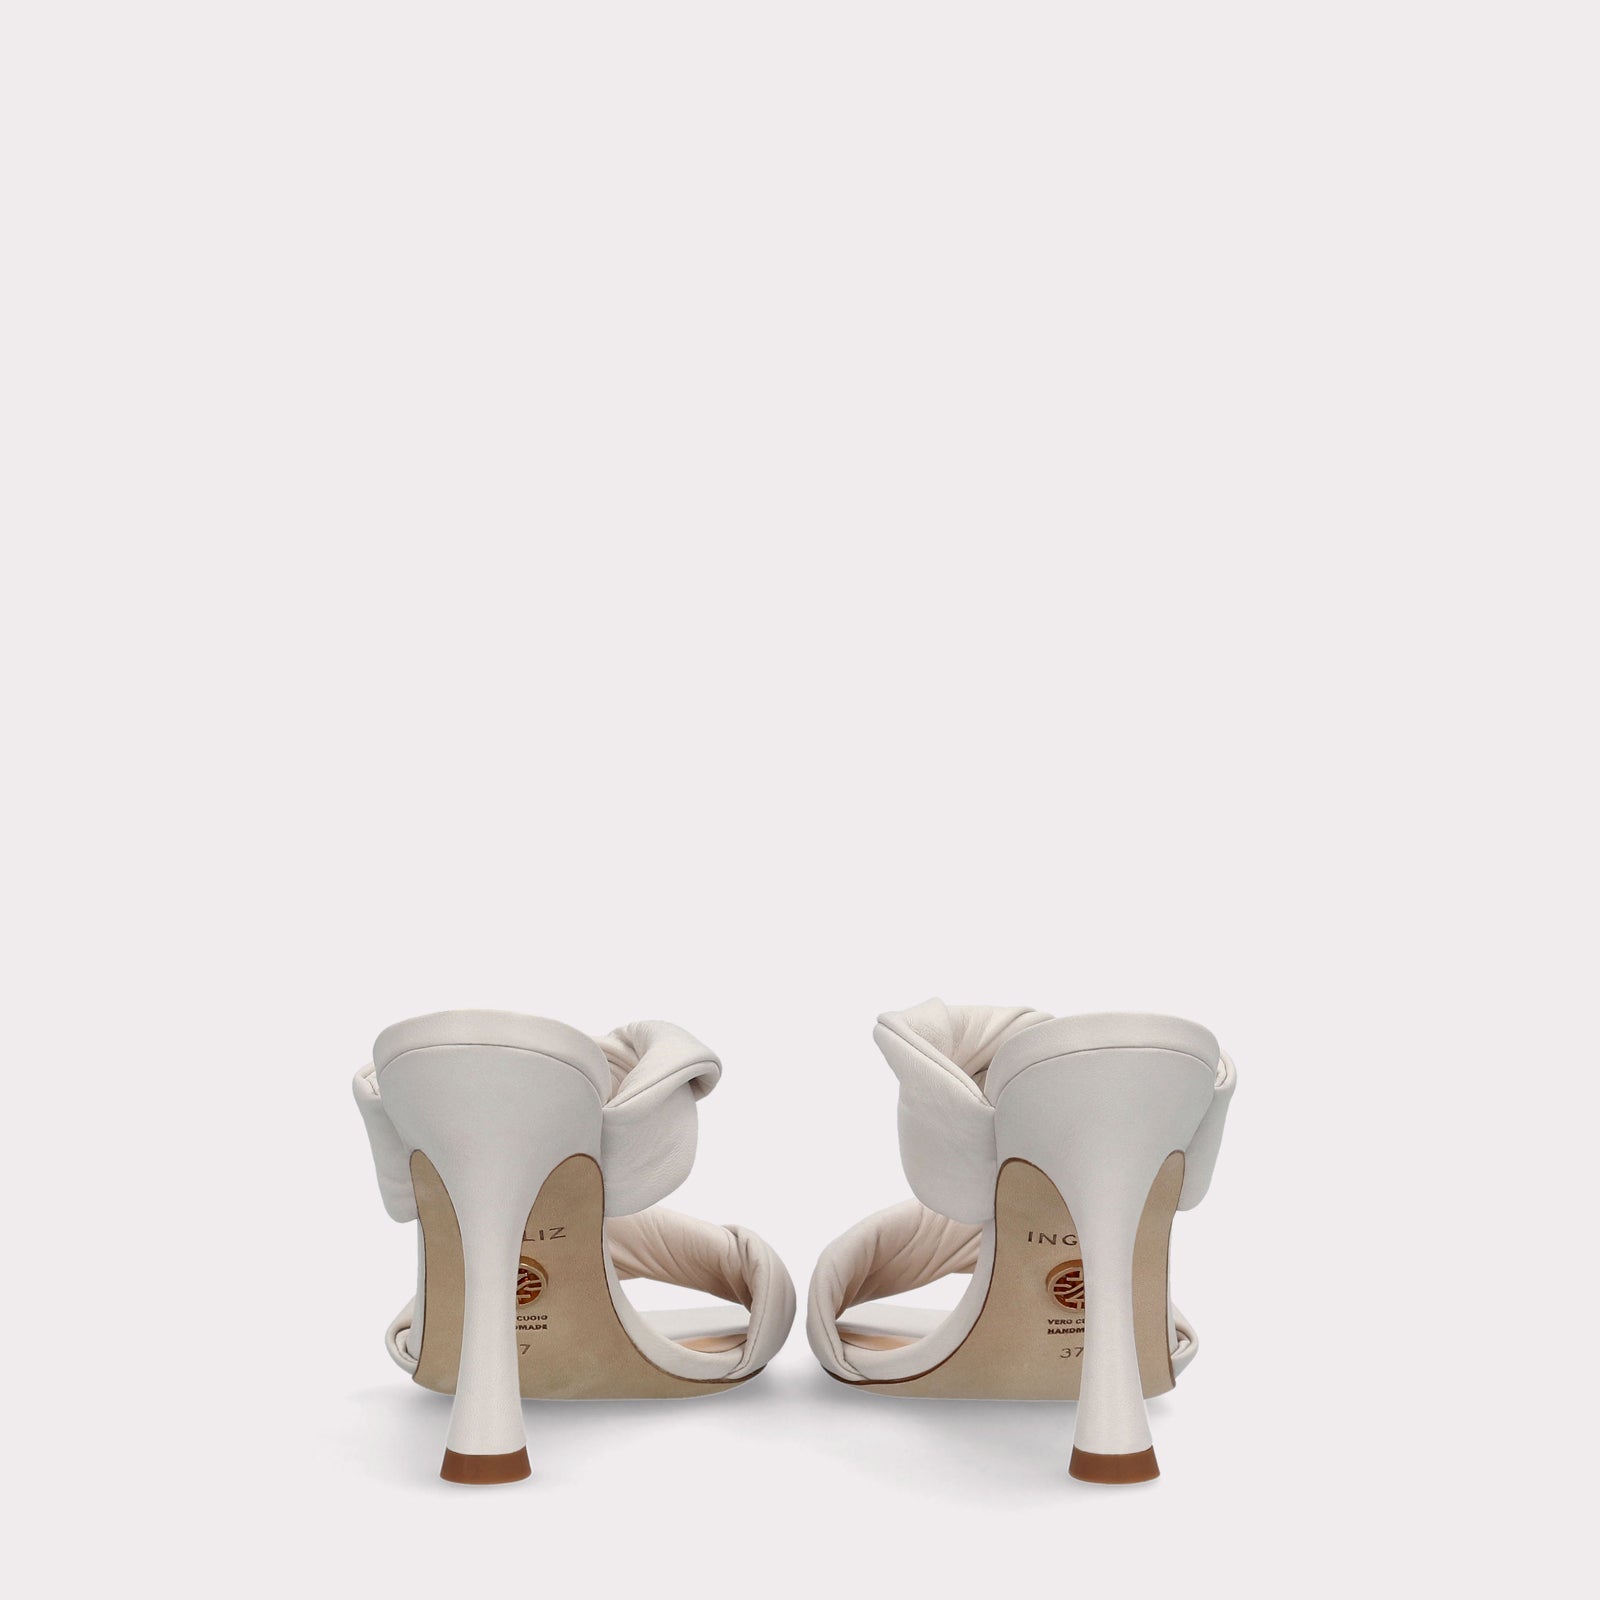 BETTY 30 IVORY LEATHER SANDALS